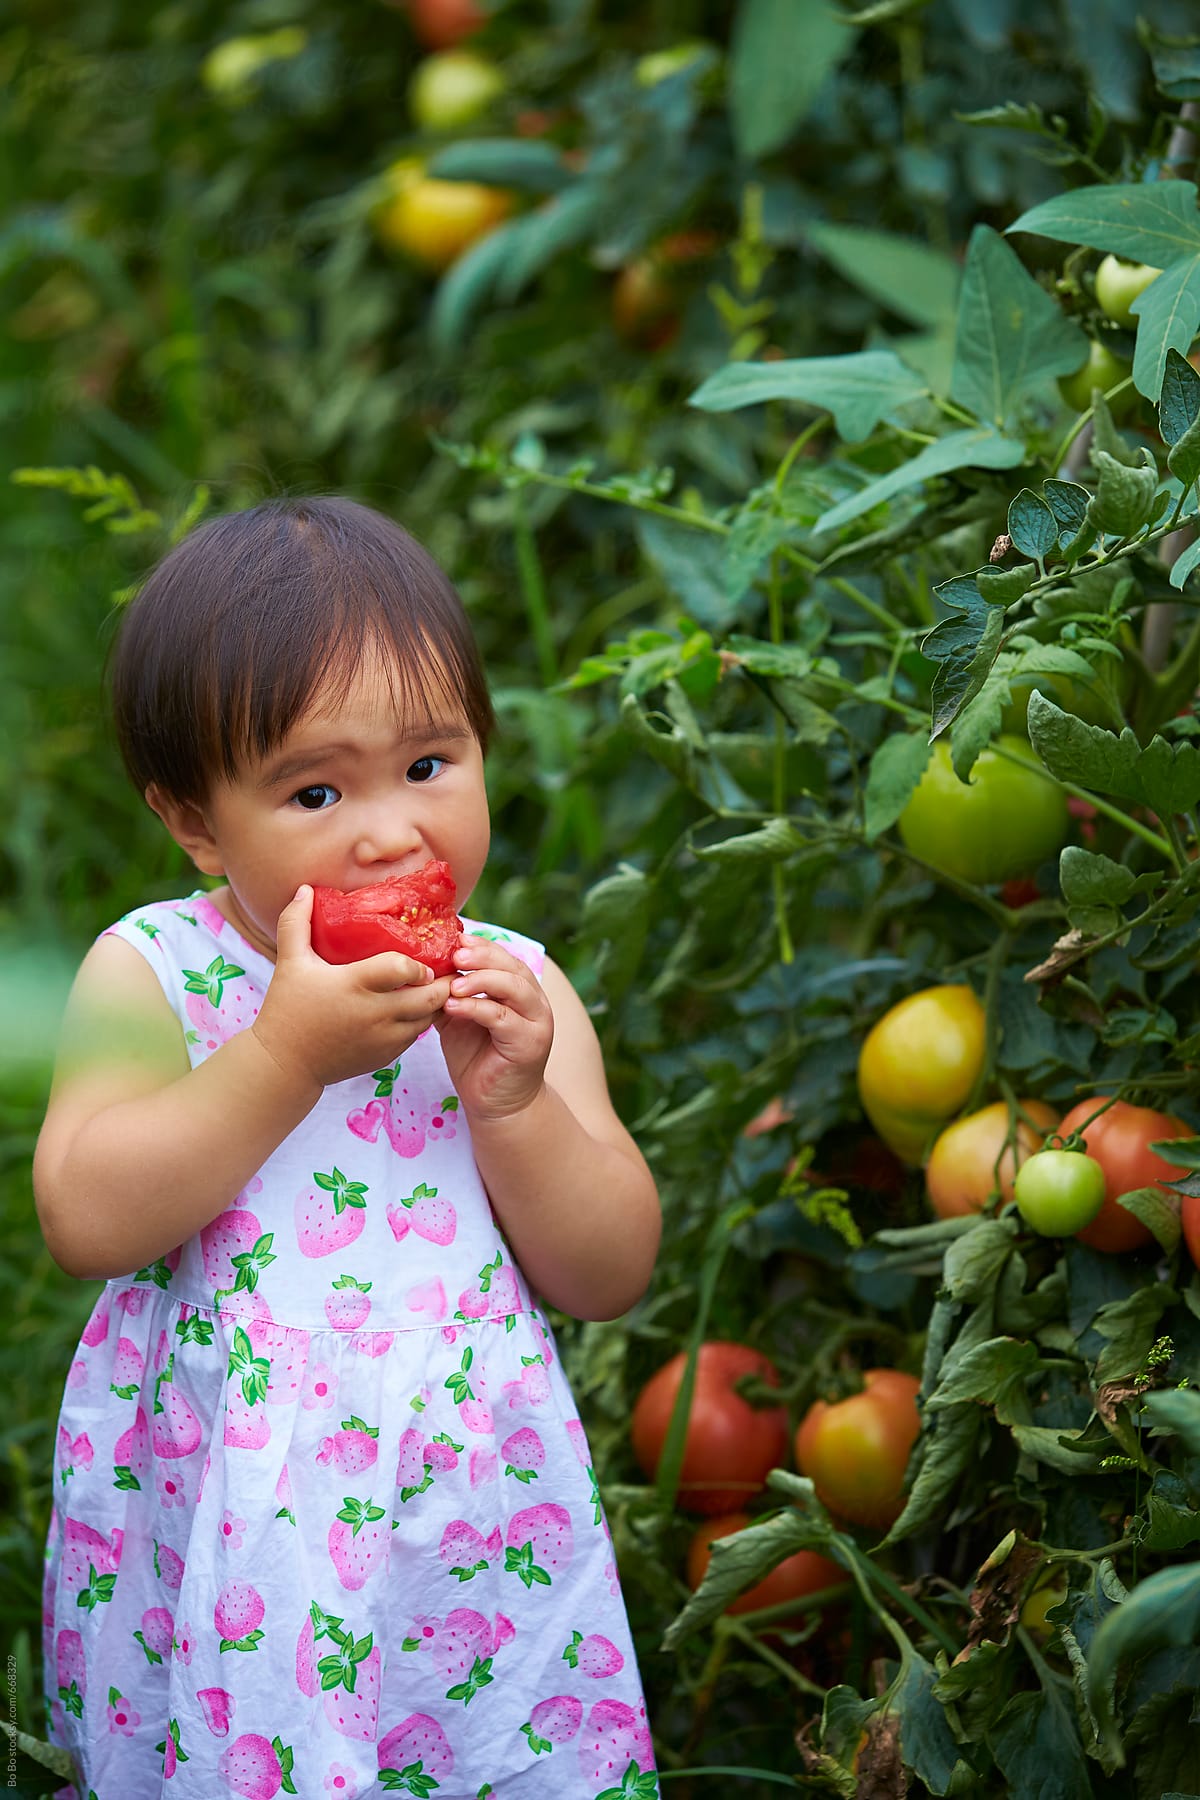 one lovely Chinese girl eating tomato in the tomato farm